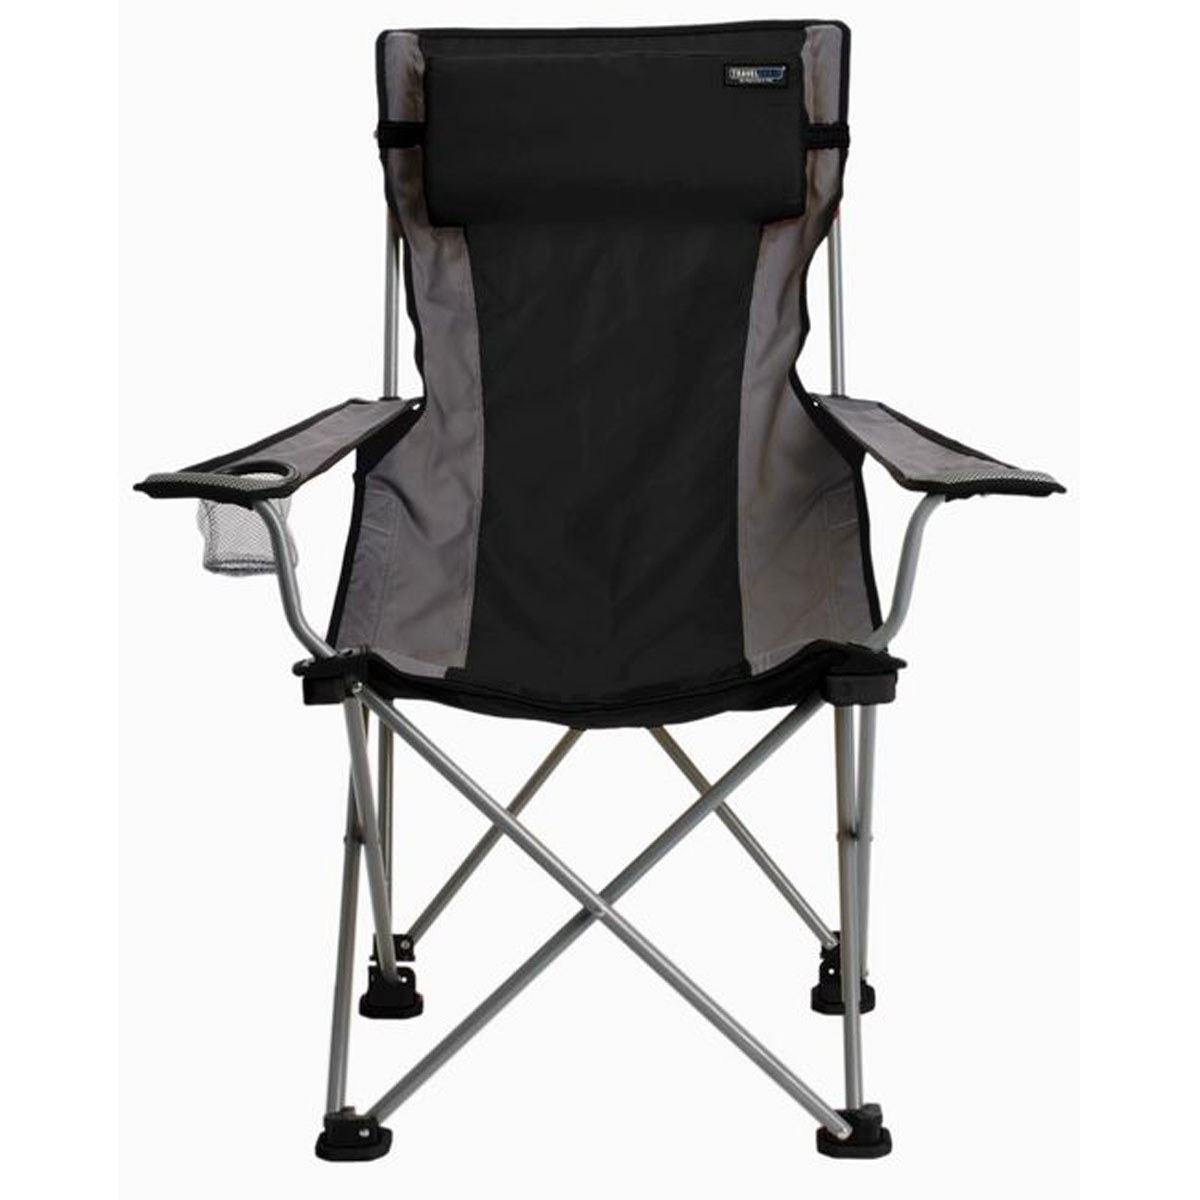 Camping Chairs | Lightweight Portable Chairs